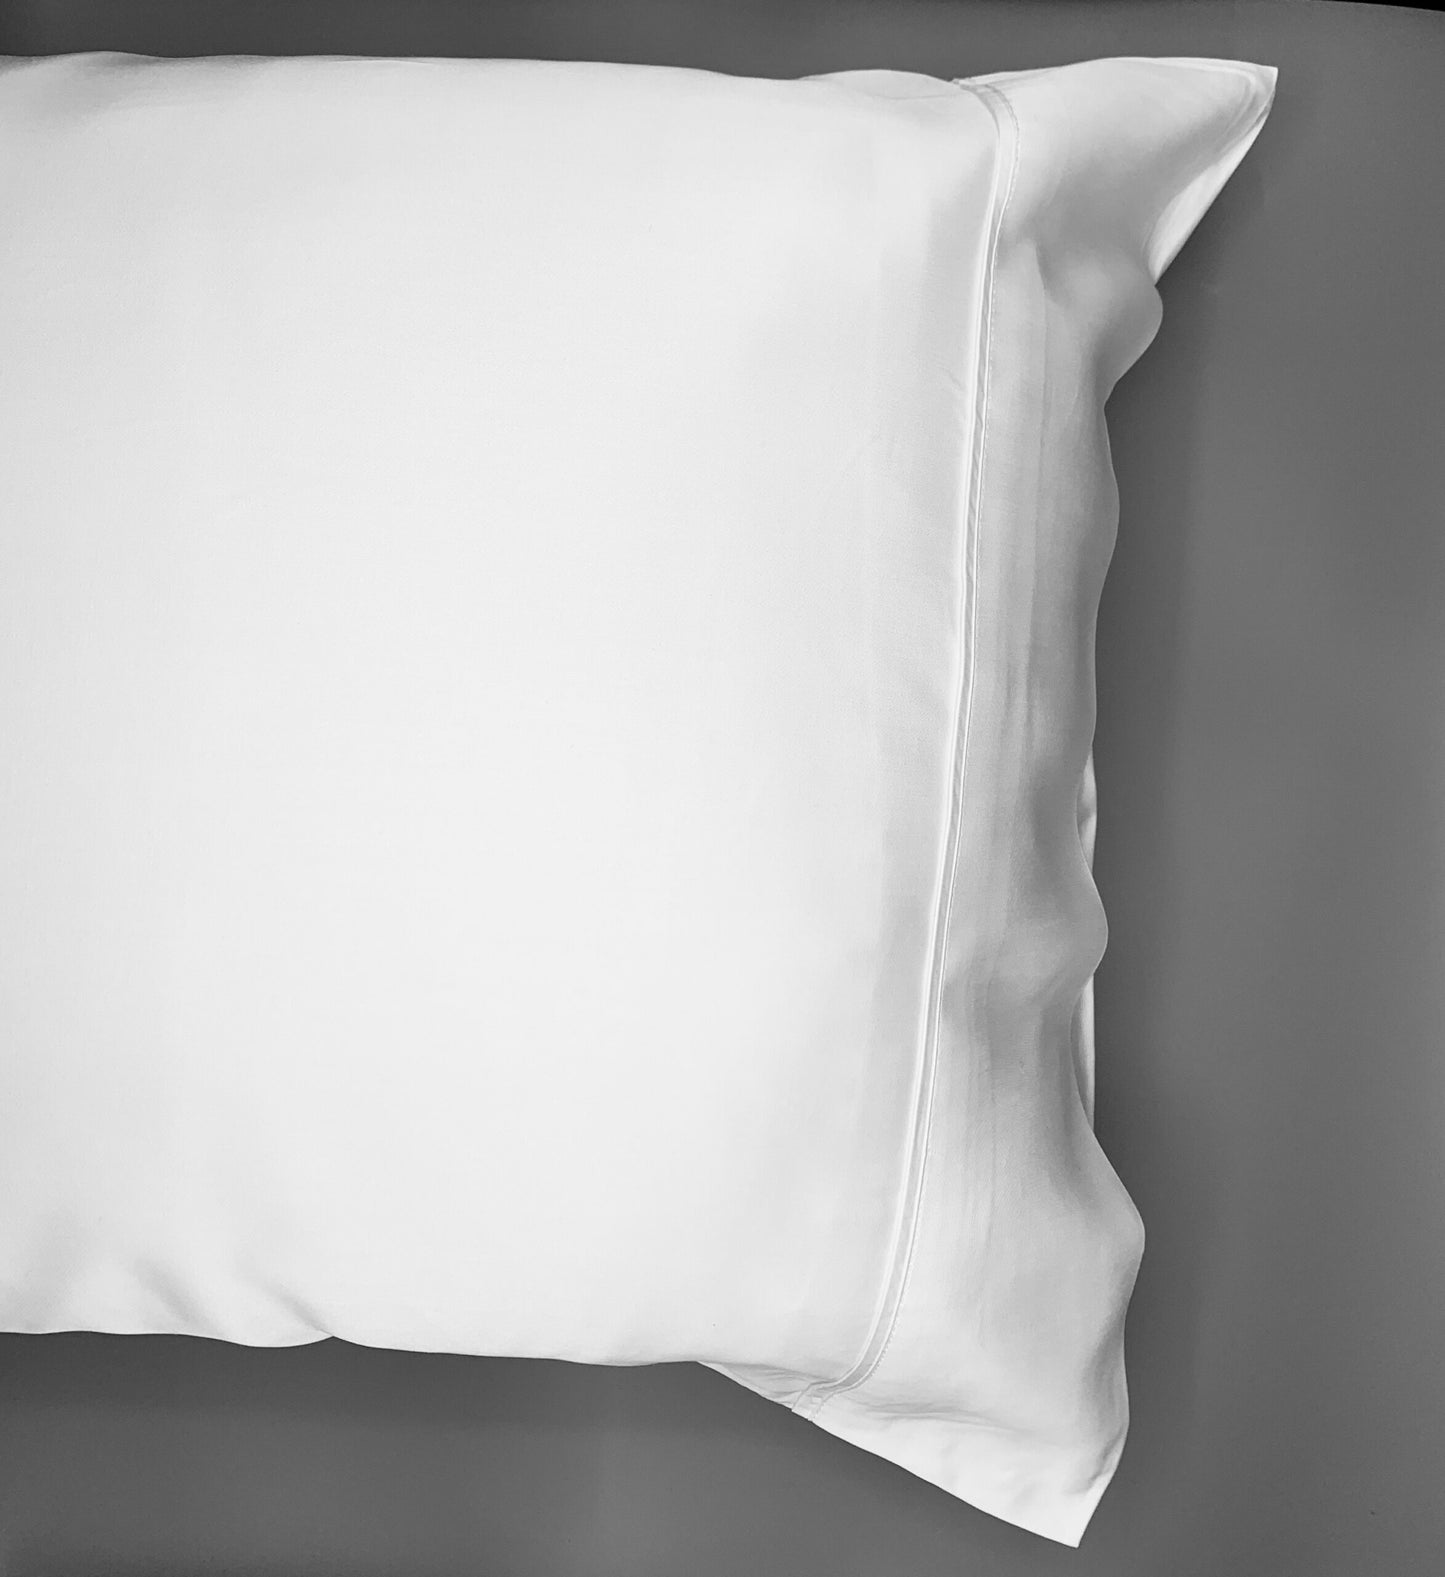 Kbamboo Bedding: Pillow Cases  – Menopause Cooling Aid